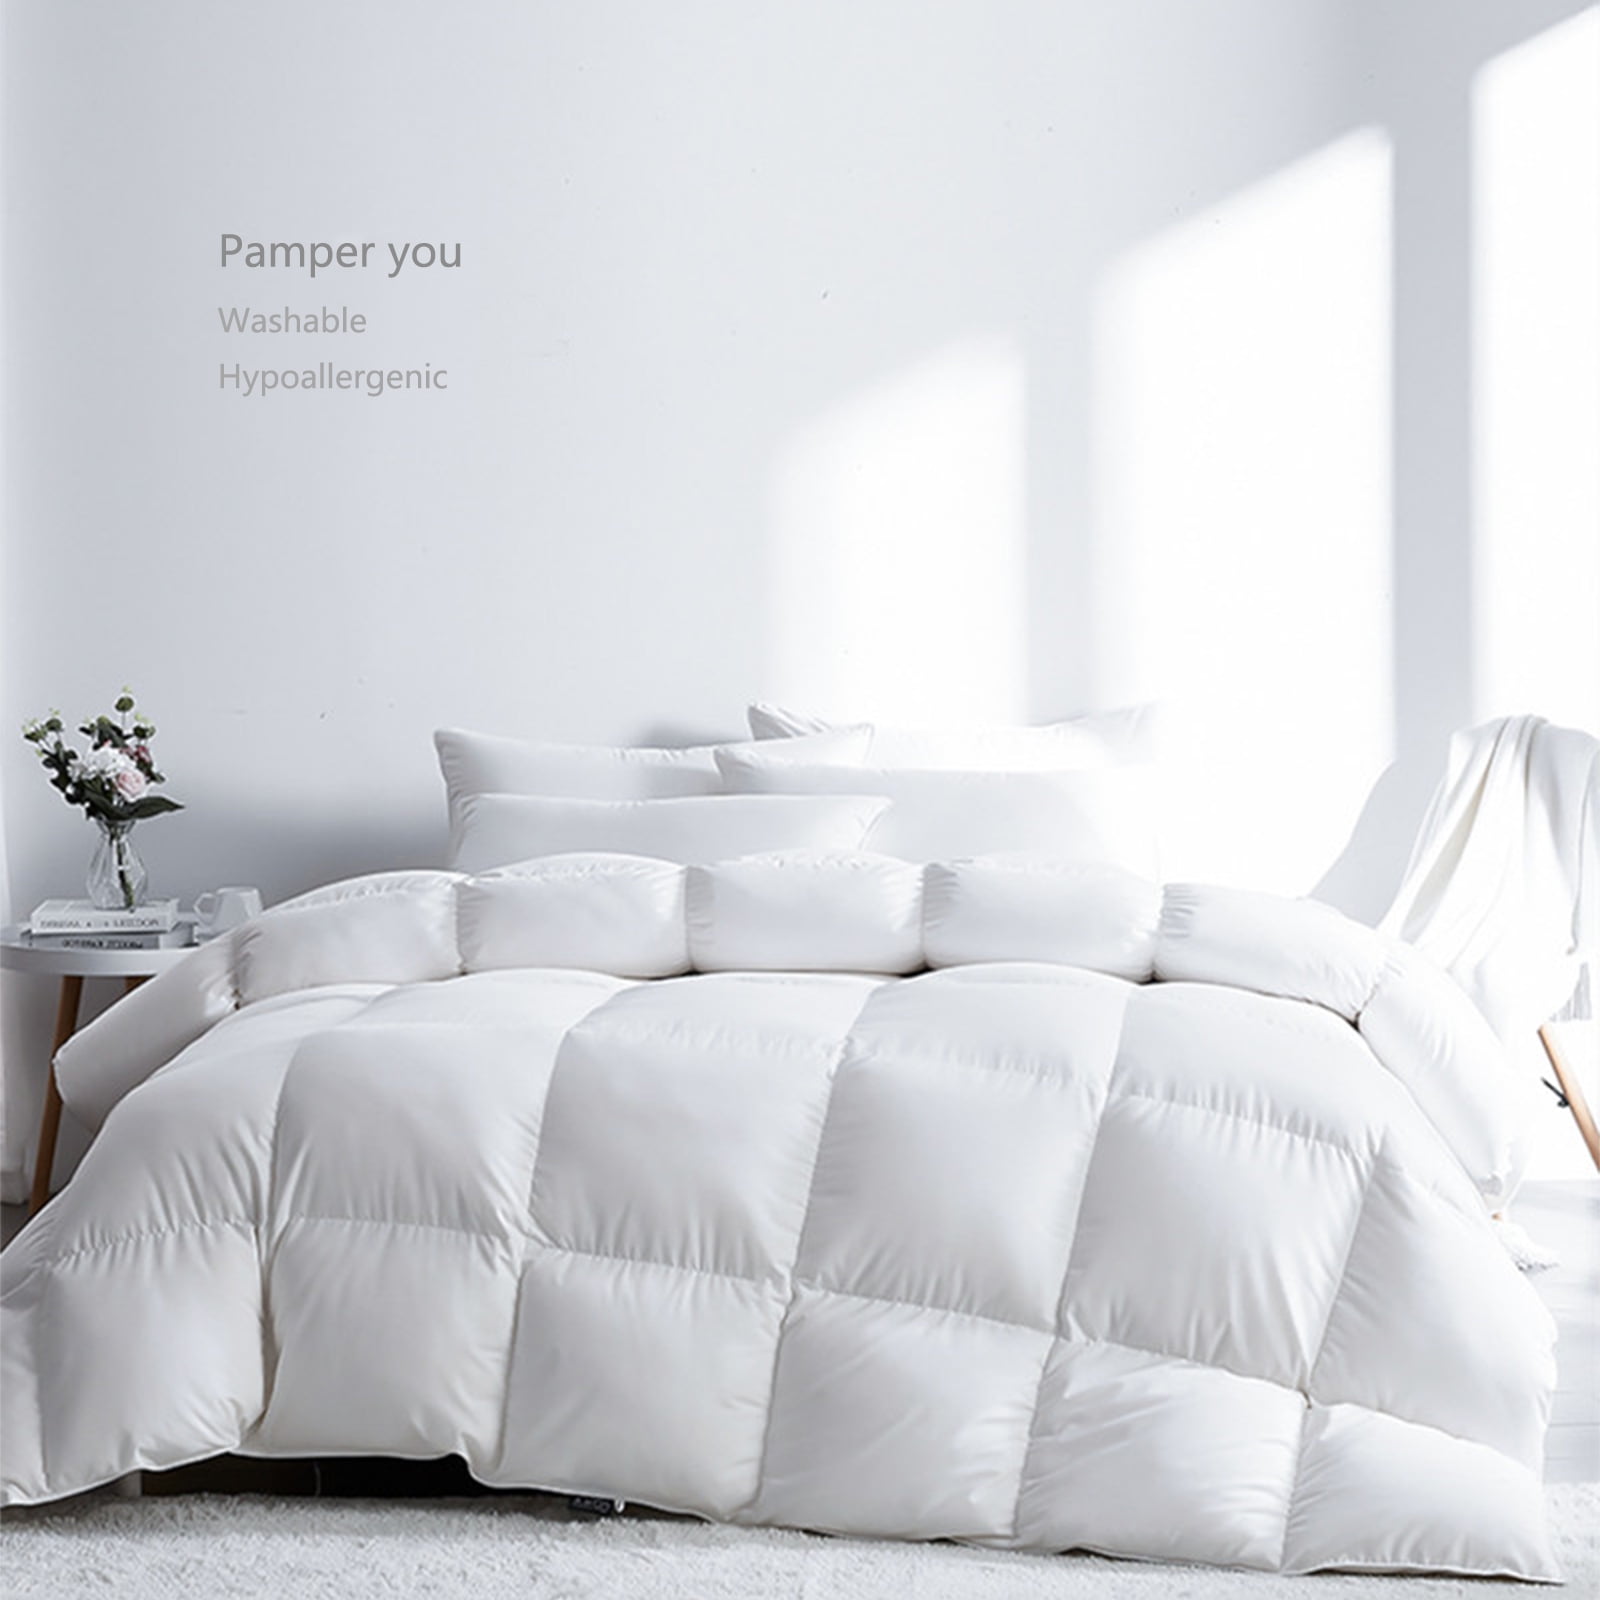 13.5 TOG Luxury JUST LIKE SILK Supersoft Microfibre Easycare Duvet ALL SIZES 